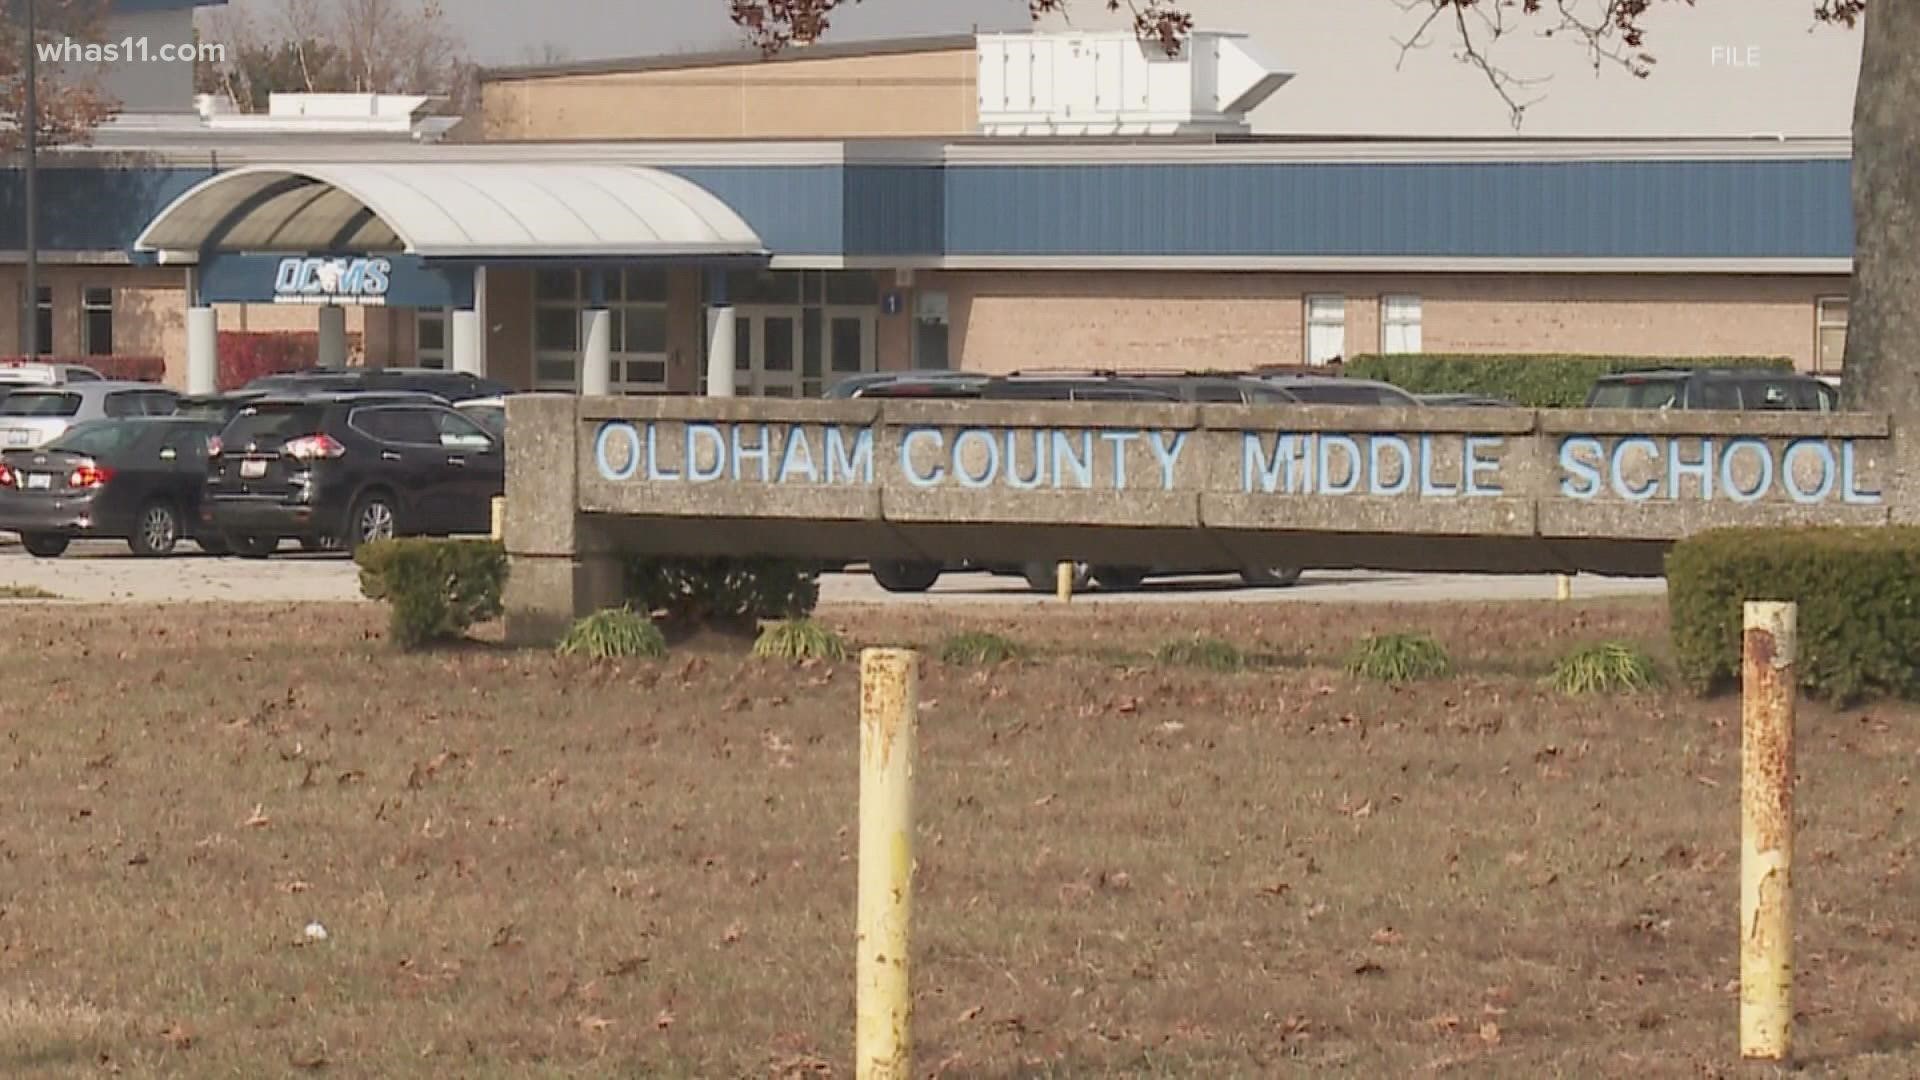 Students in Oldham County will have to pack their masks when they return to school Wednesday.